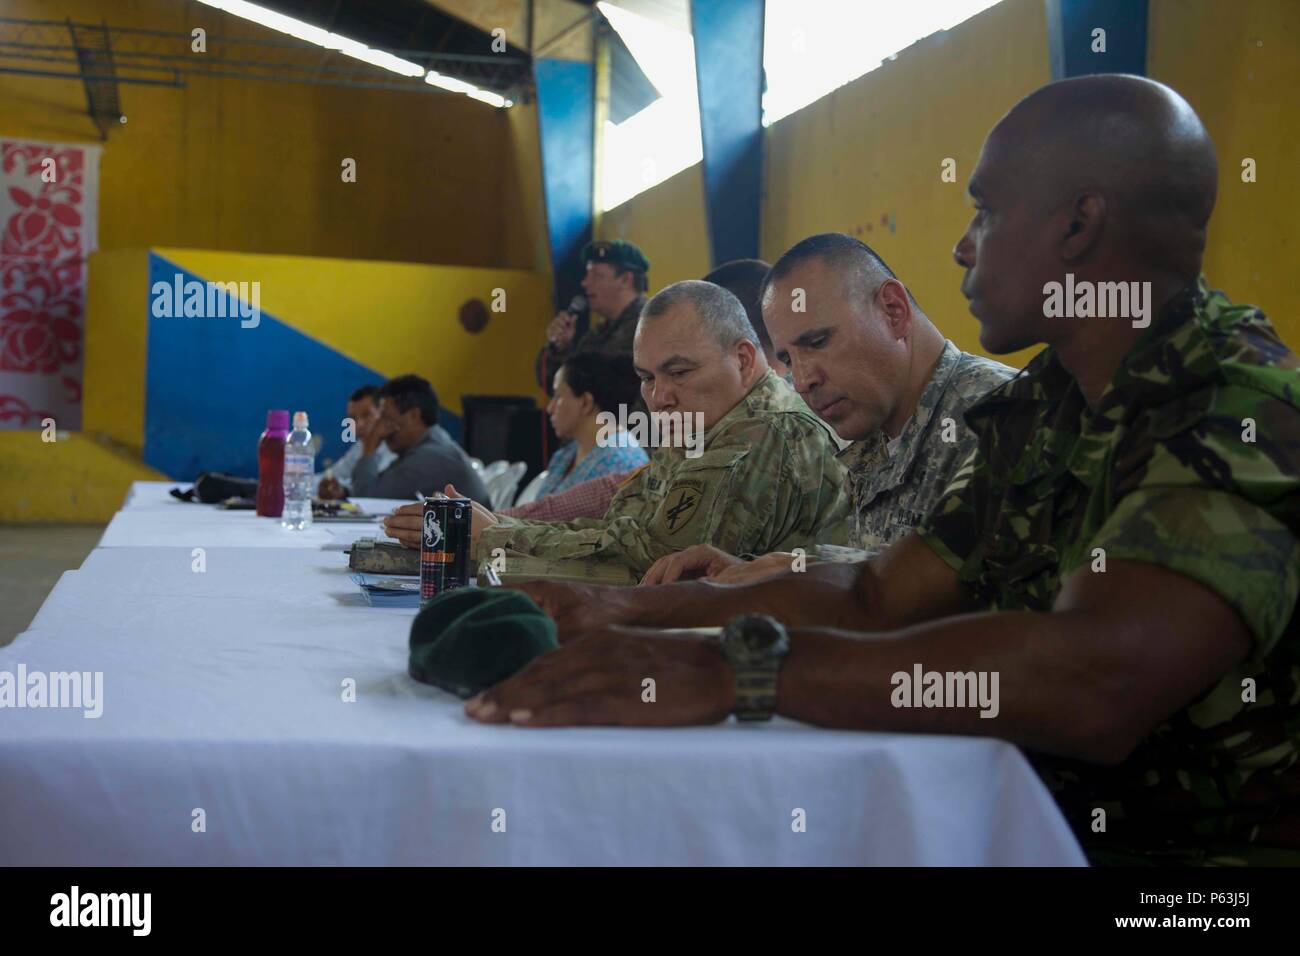 Joint Military Members, local Cocodes from the surrounding areas and Assistant Mayor Pablo Pocheco conduct a meeting to speak about the future Medical Readiness Exercise as part of the Beyond The Horizon Operation at San Pablo, Guatemala, April 29, 2016. Task Force Red Wolf and Army South conducts Humanitarian Civil Assistance Training to include tactical level construction projects and Medical Readiness Training Exercises providing medical access and building schools in Guatemala with the Guatemalan Government and non-government agencies from 05MAR16 to 18JUN16 in order to improve the mission Stock Photo